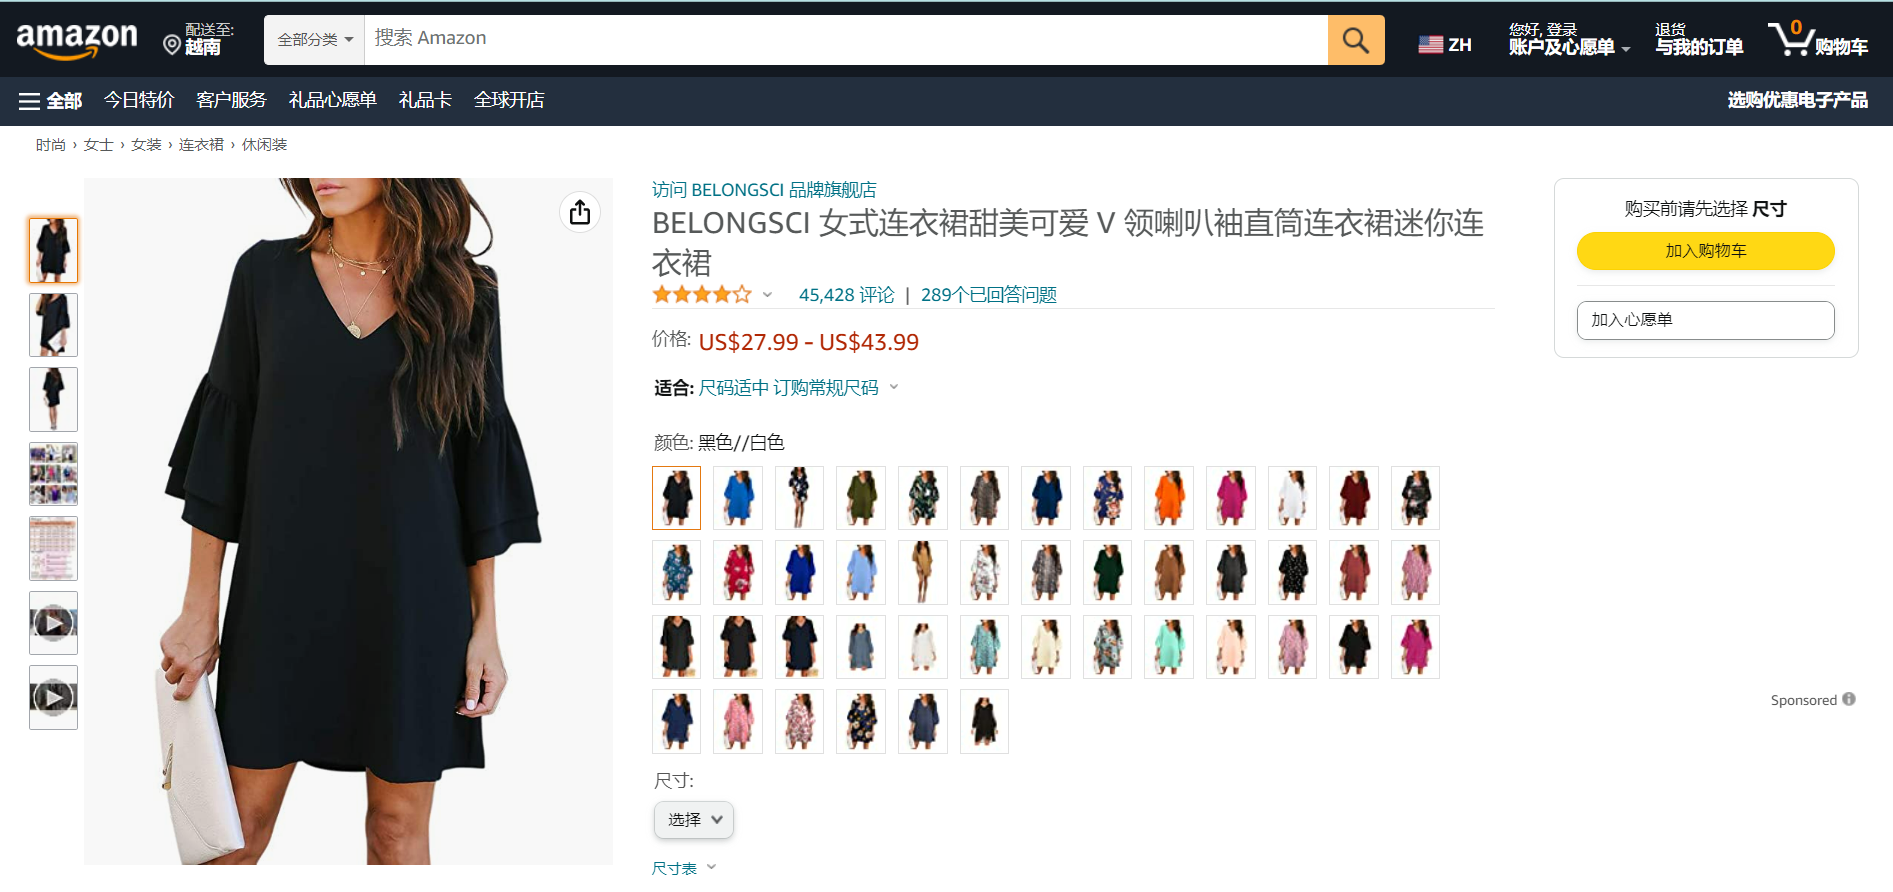 E-commerce Product Page Best Practices for 2023